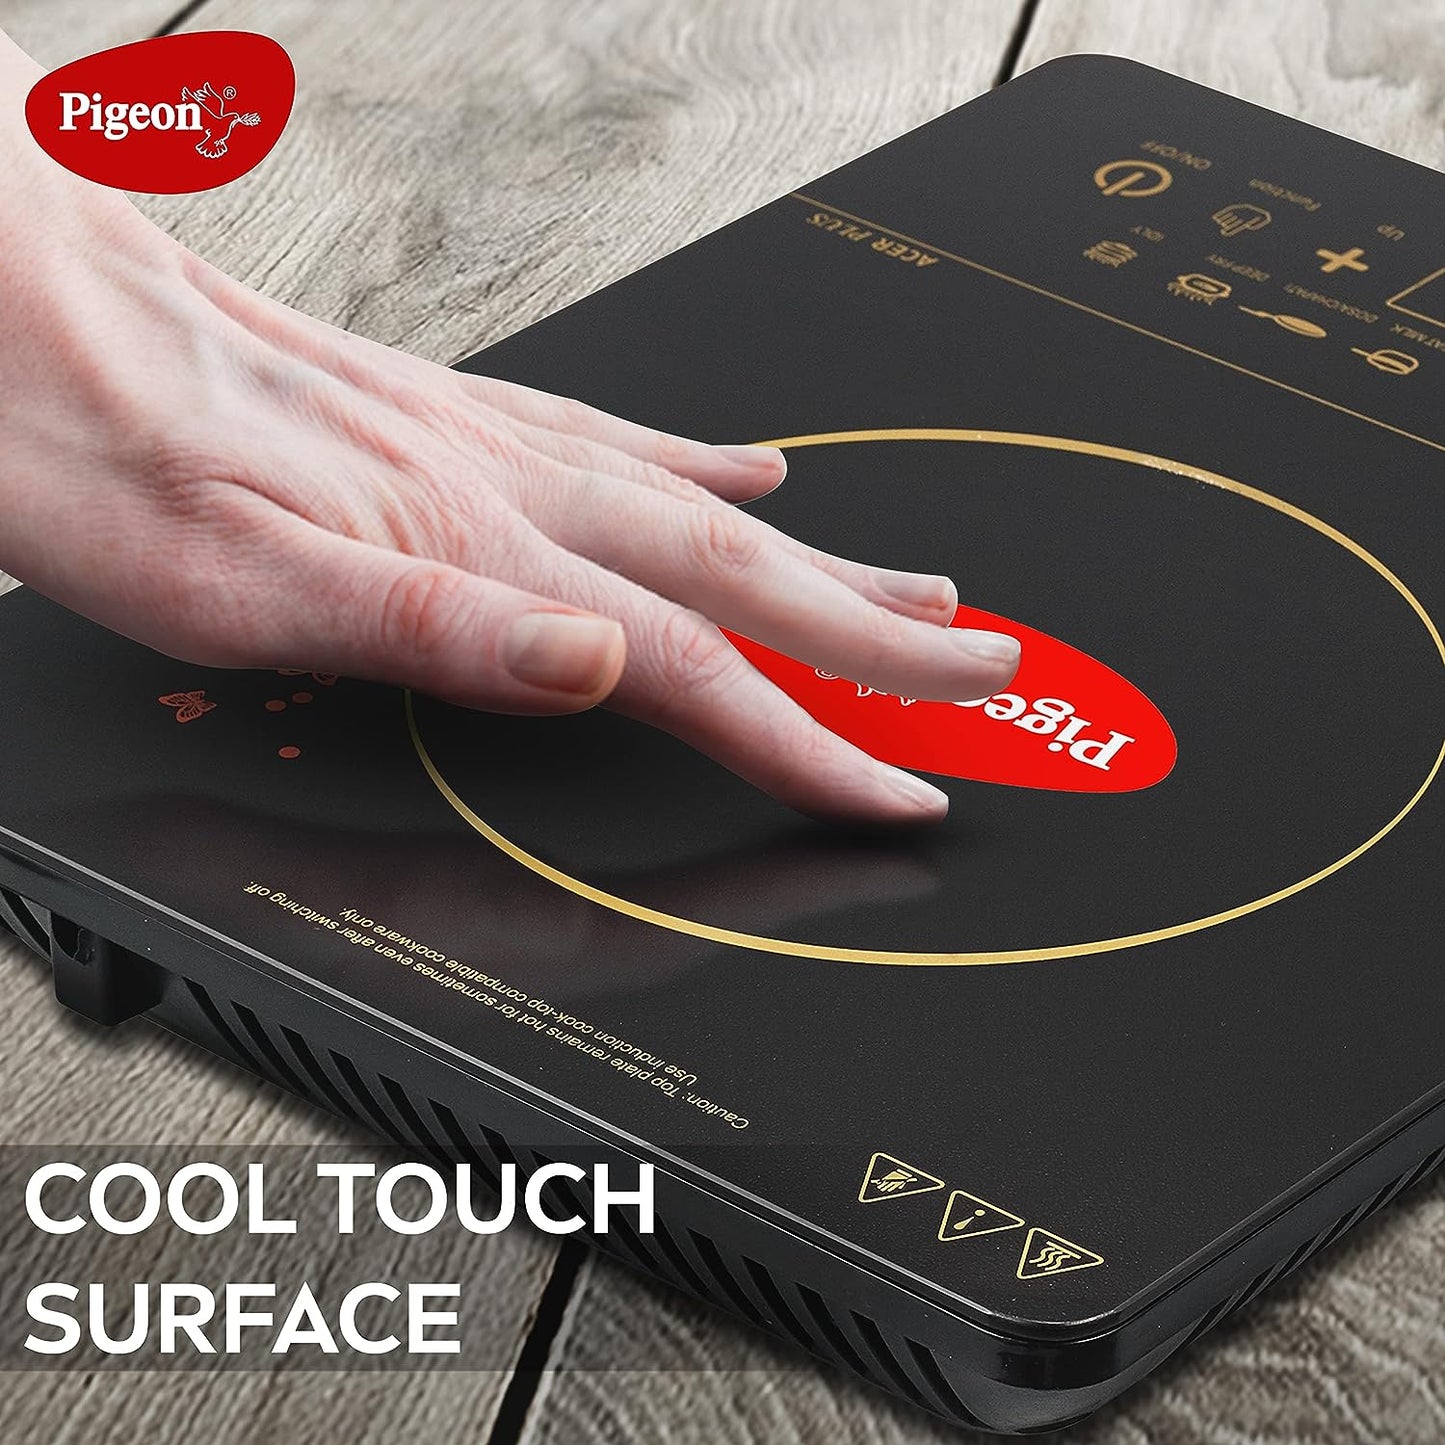 Pigeon Acer Plus 1800 Watt Induction Cooktop with Feather Touch Control - 14429